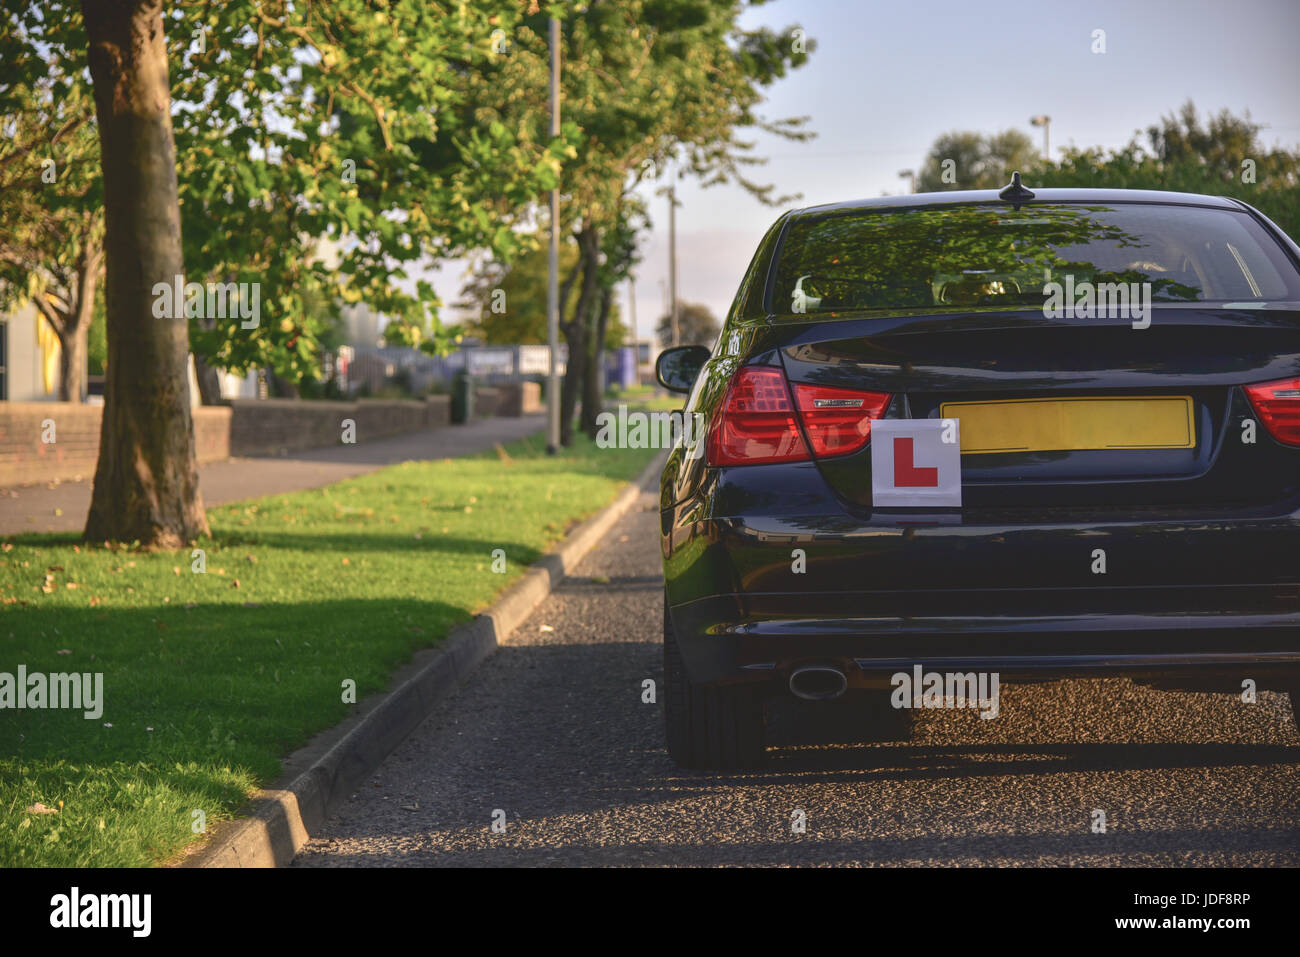 A car with the L plates on ready for a new driver to use. Stock Photo